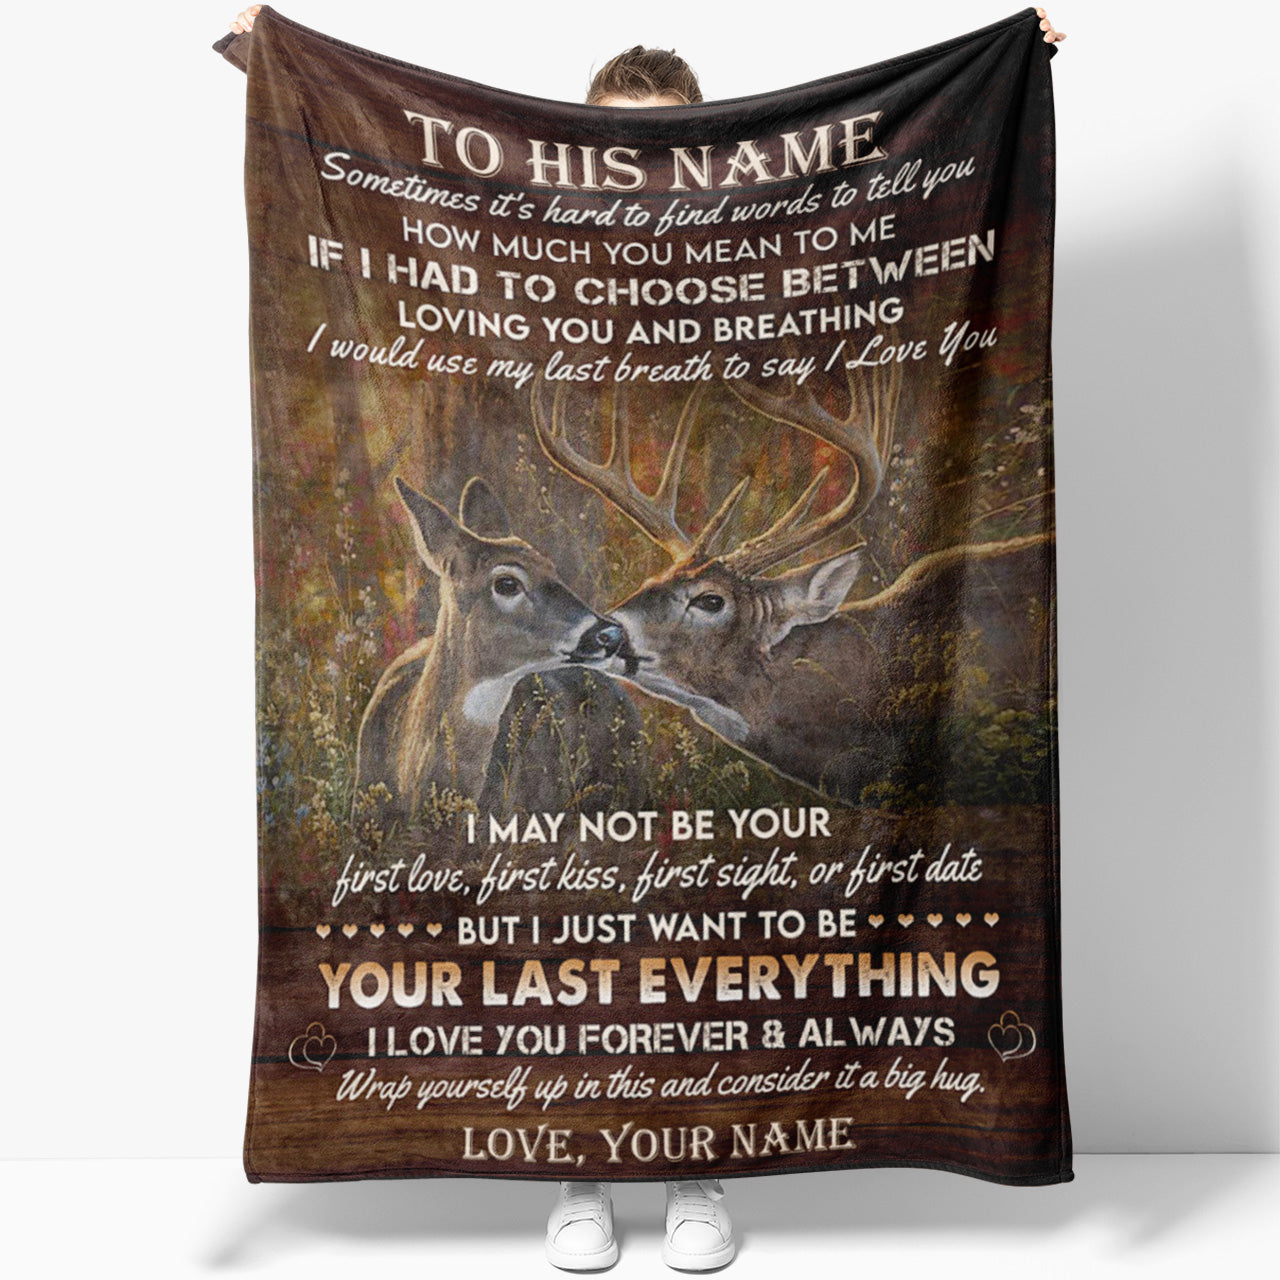 Blanket Gift For Him, Unique Birthday Gifts For Him, Loving Quote for Him